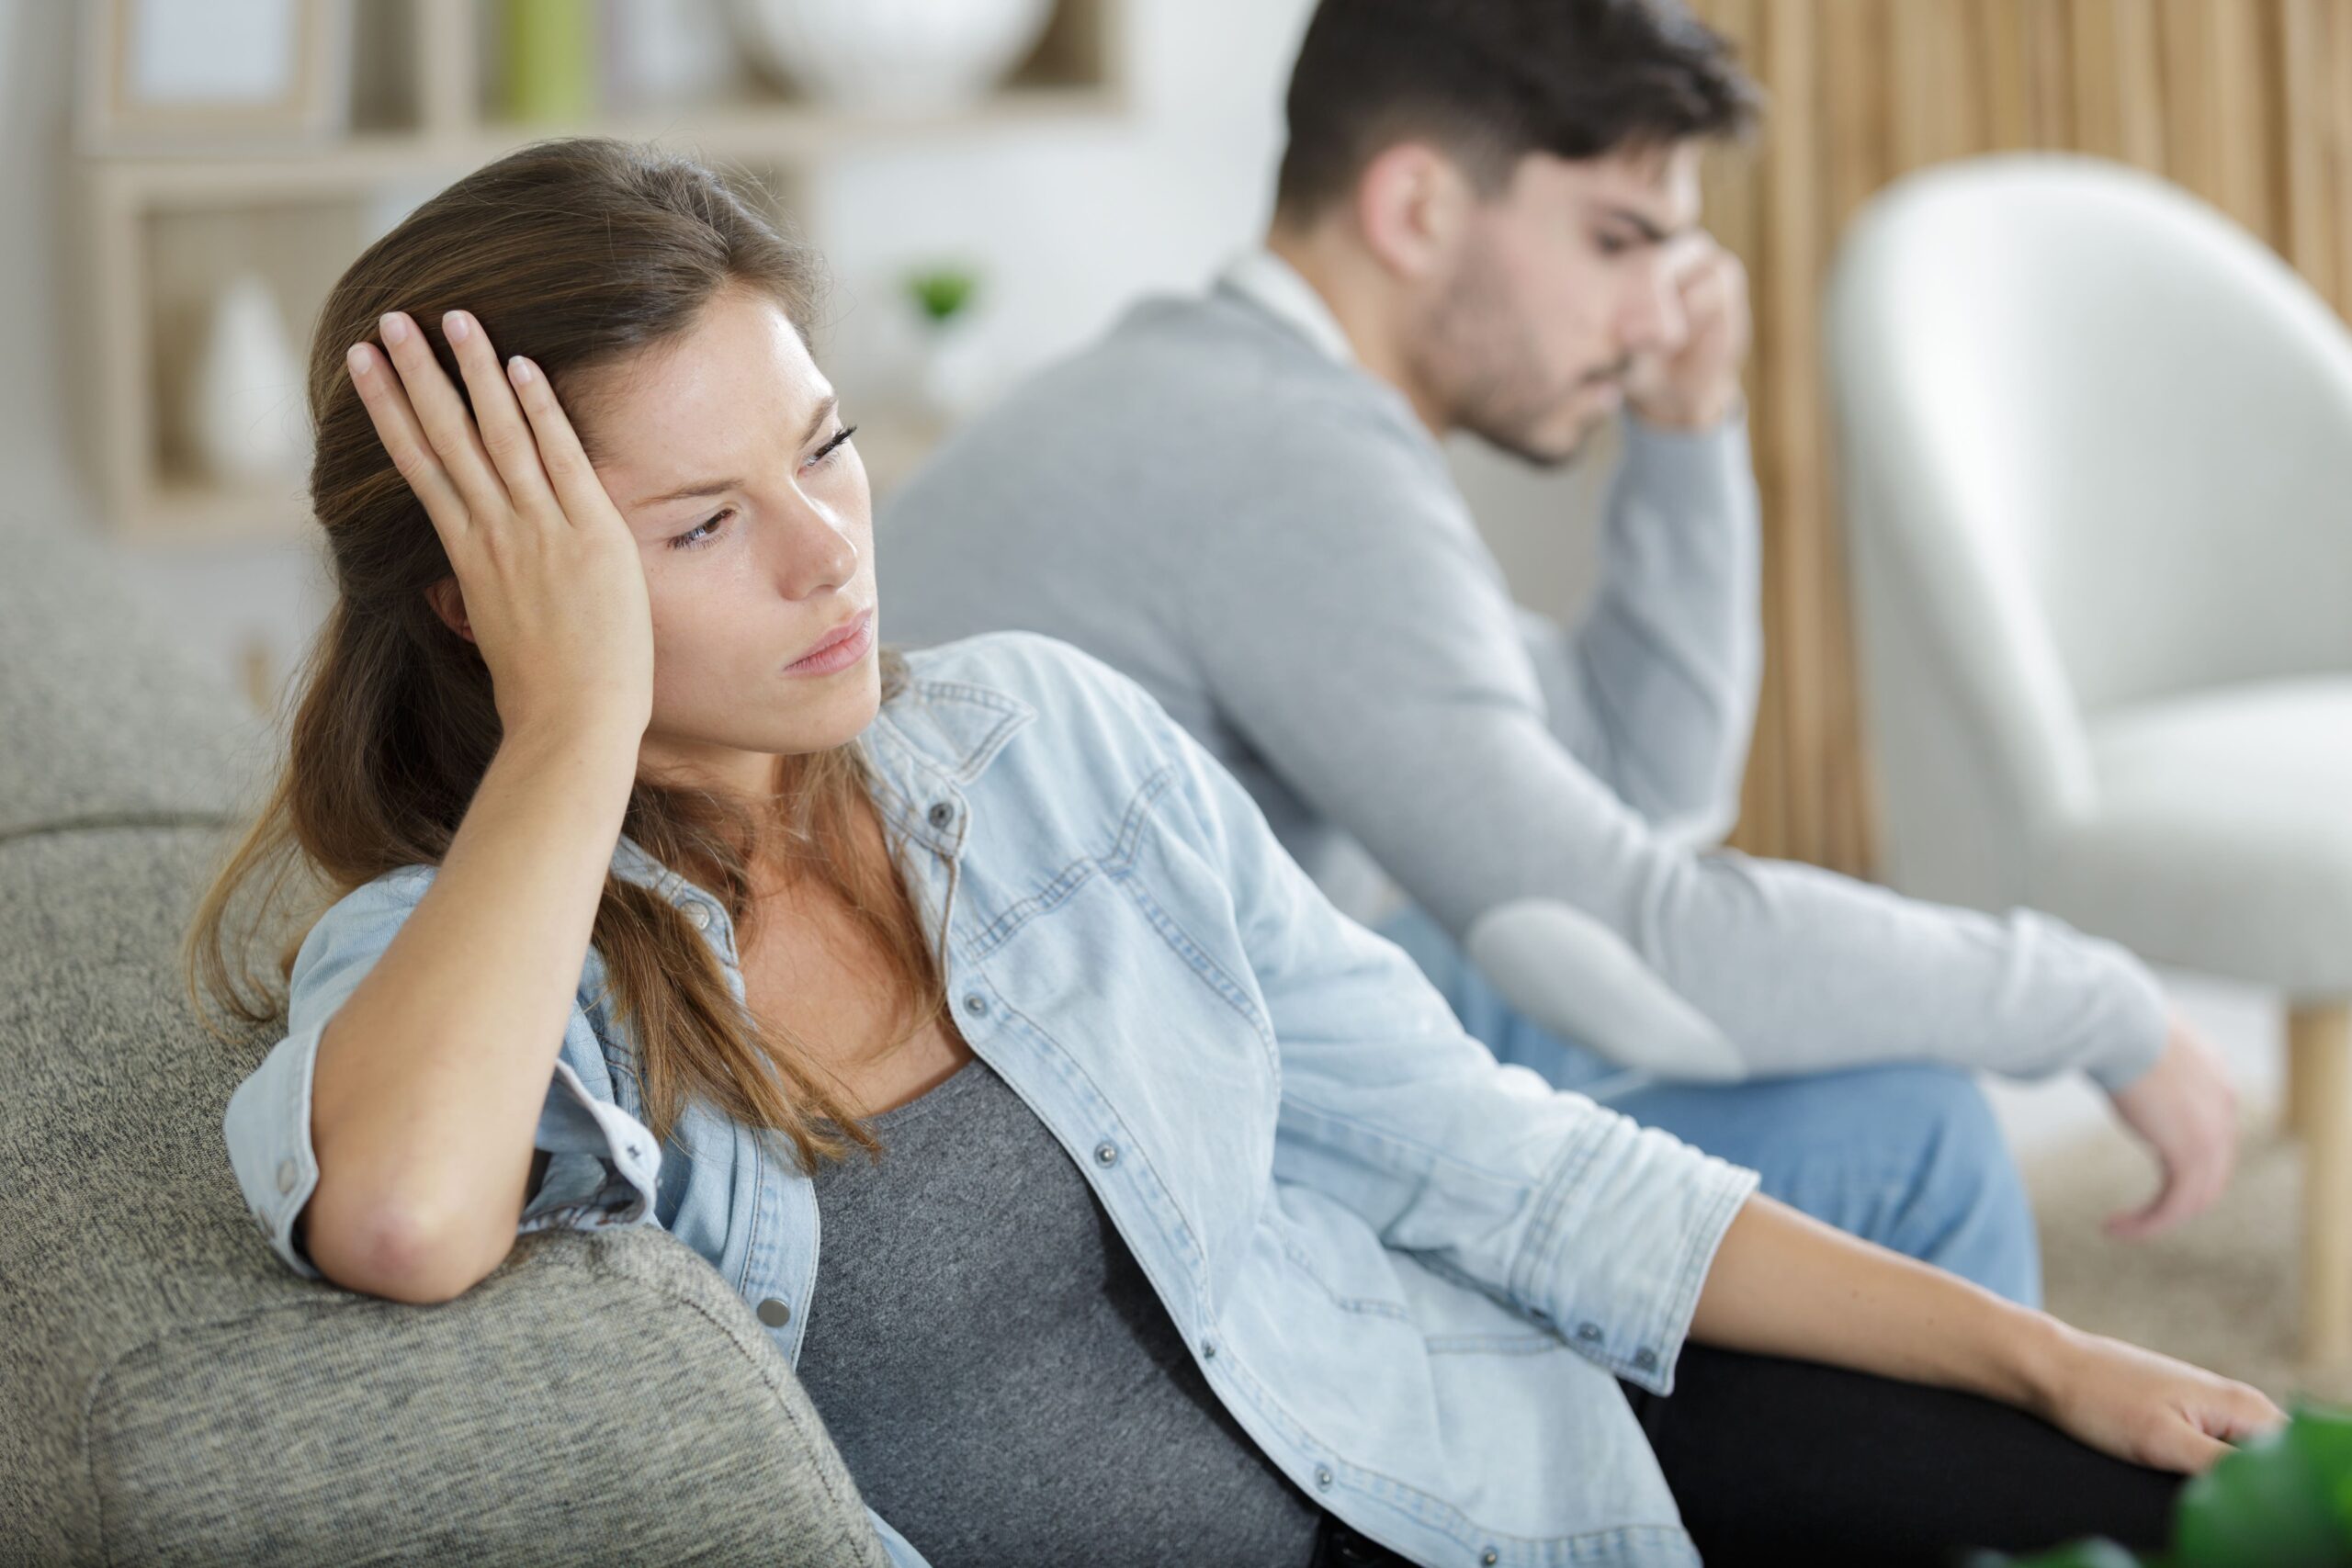 Woman sits on couch feeling distant from her husband.